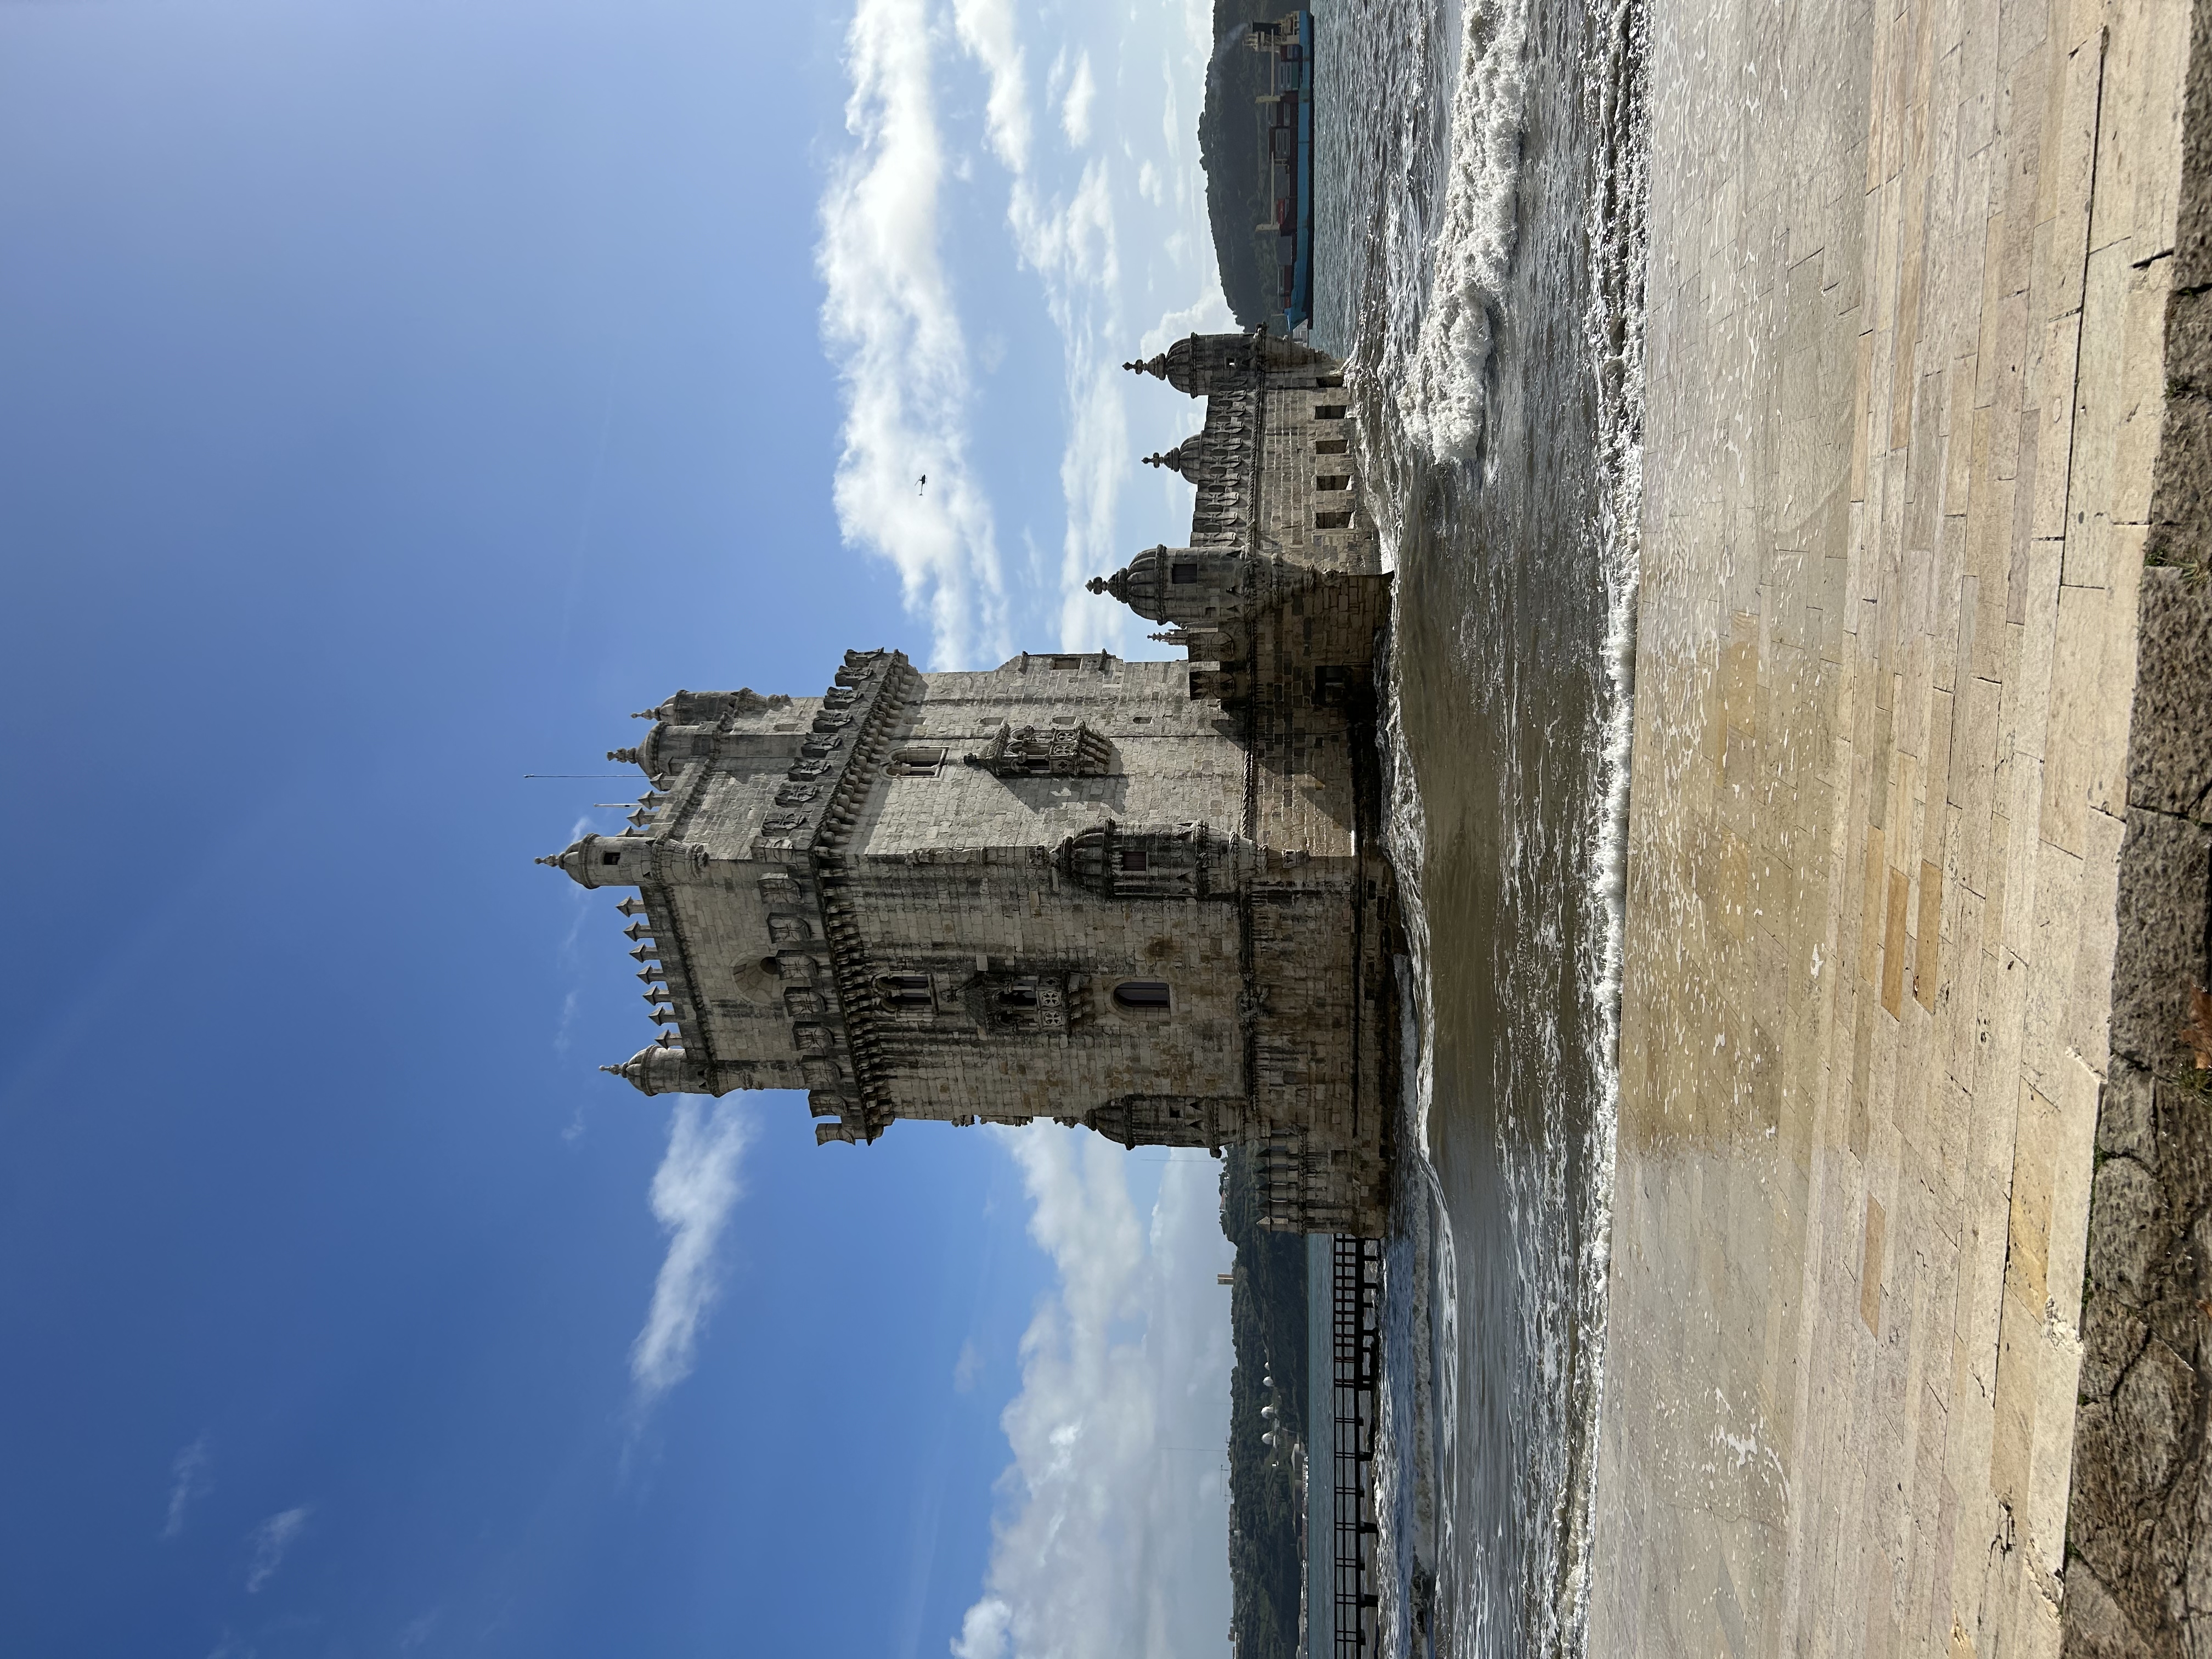 Belem Tower standing majestically under a clear blue sky, its intricate limestone carvings and sturdy battlements highlighted by the bright sunlight. The Tagus River surrounds the tower, with gentle waves lapping against the stone embankment in the foreground.